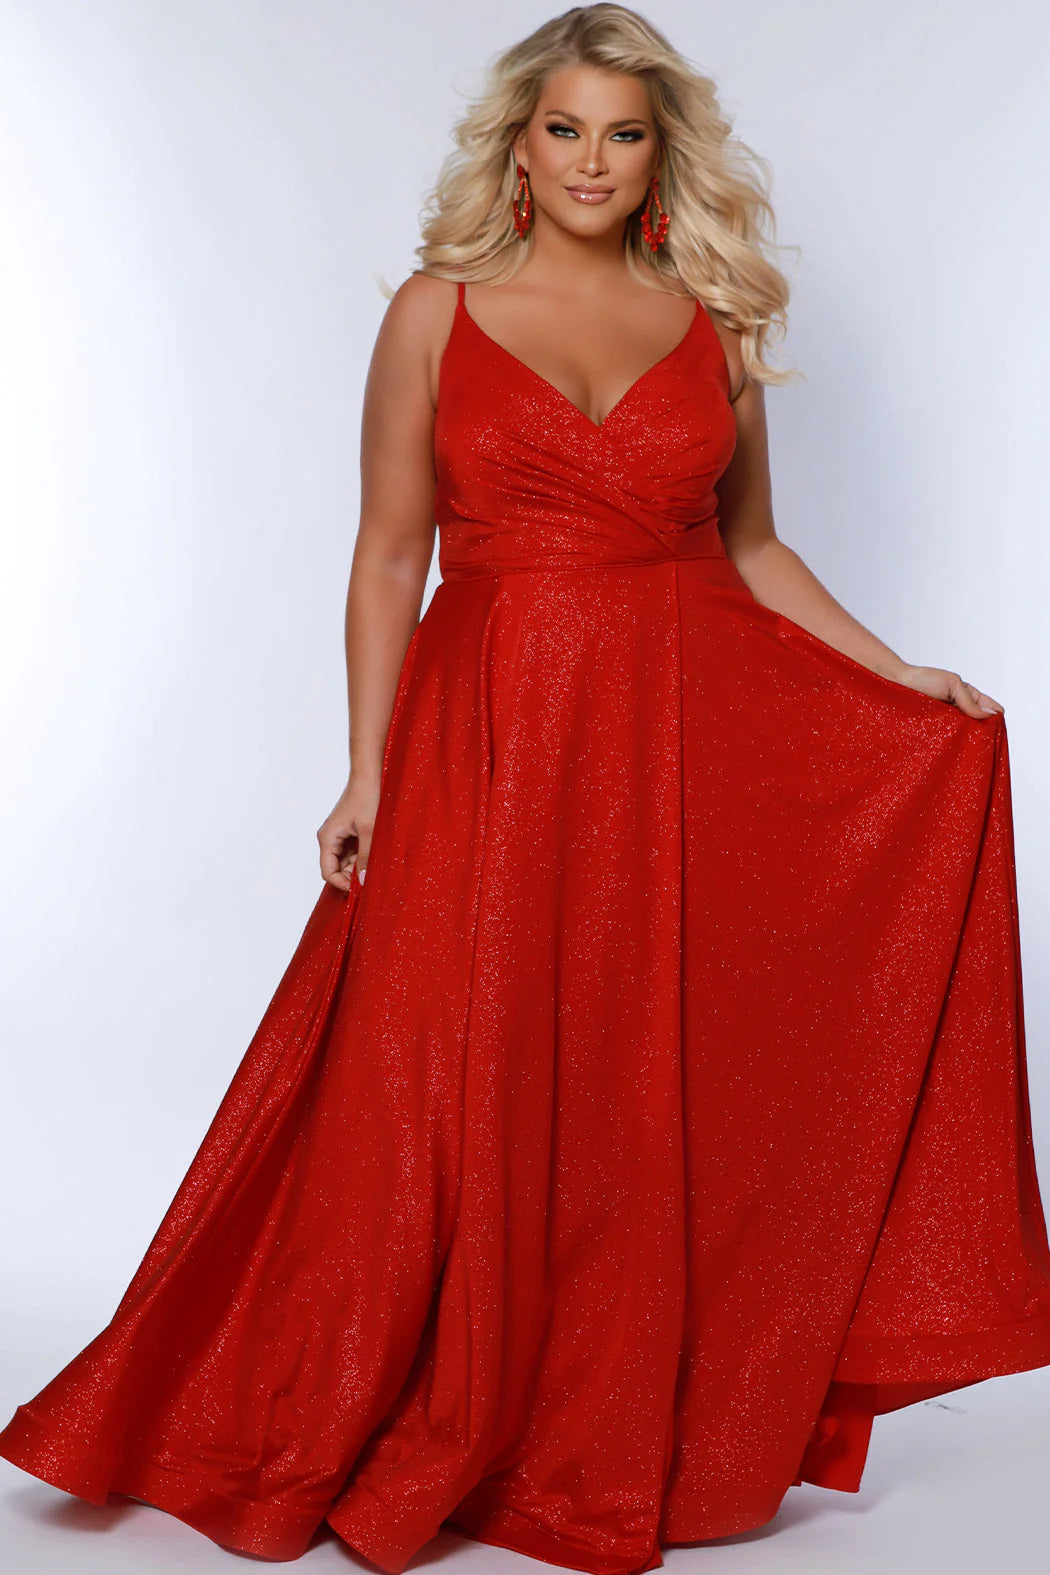 Look your best in our Sydney's Closet SC7375 Long Prom Dress - a beautiful A-line plus-size with a shimmering look an alluring maxi slit, and a formal gown silhouette that is perfect for any special event. The dress offers a flattering fit for all body types. All eyes are on you when you sparkle in this fabulous formal gown designed for women with real curves.